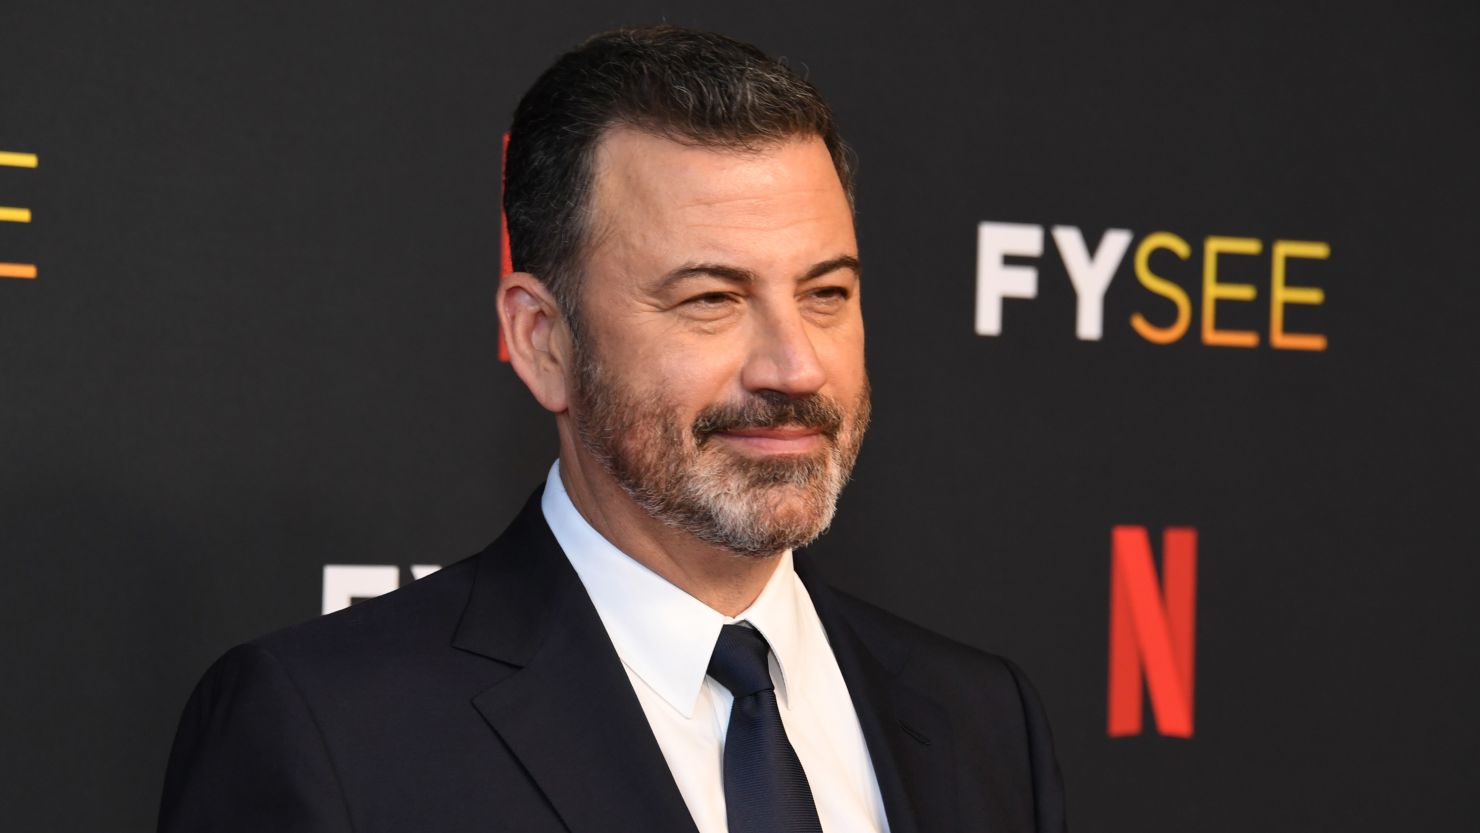 LOS ANGELES, CALIFORNIA - JUNE 05: Jimmy Kimmel attends "OZARK: The Final Episodes" Los Angeles Special FYSEE Event at Netflix FYSEE At Raleigh Studios on June 05, 2022 in Los Angeles, California. (Photo by Jon Kopaloff/Getty Images)